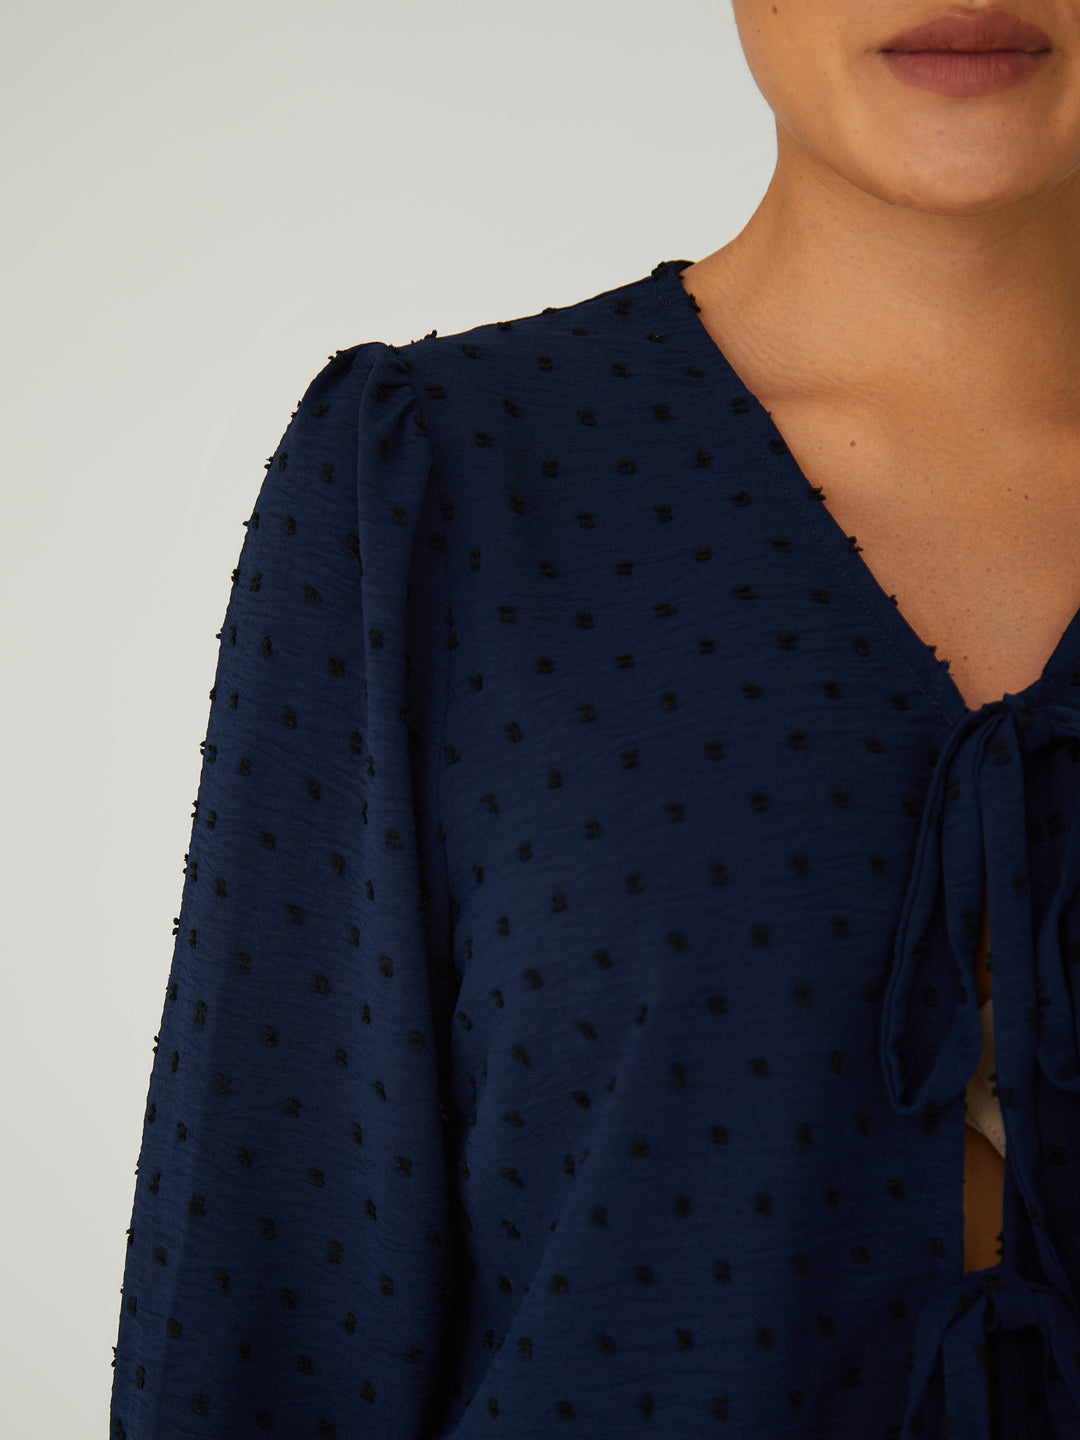 A-View - Sif Blouse - 699 Navy Bluser 